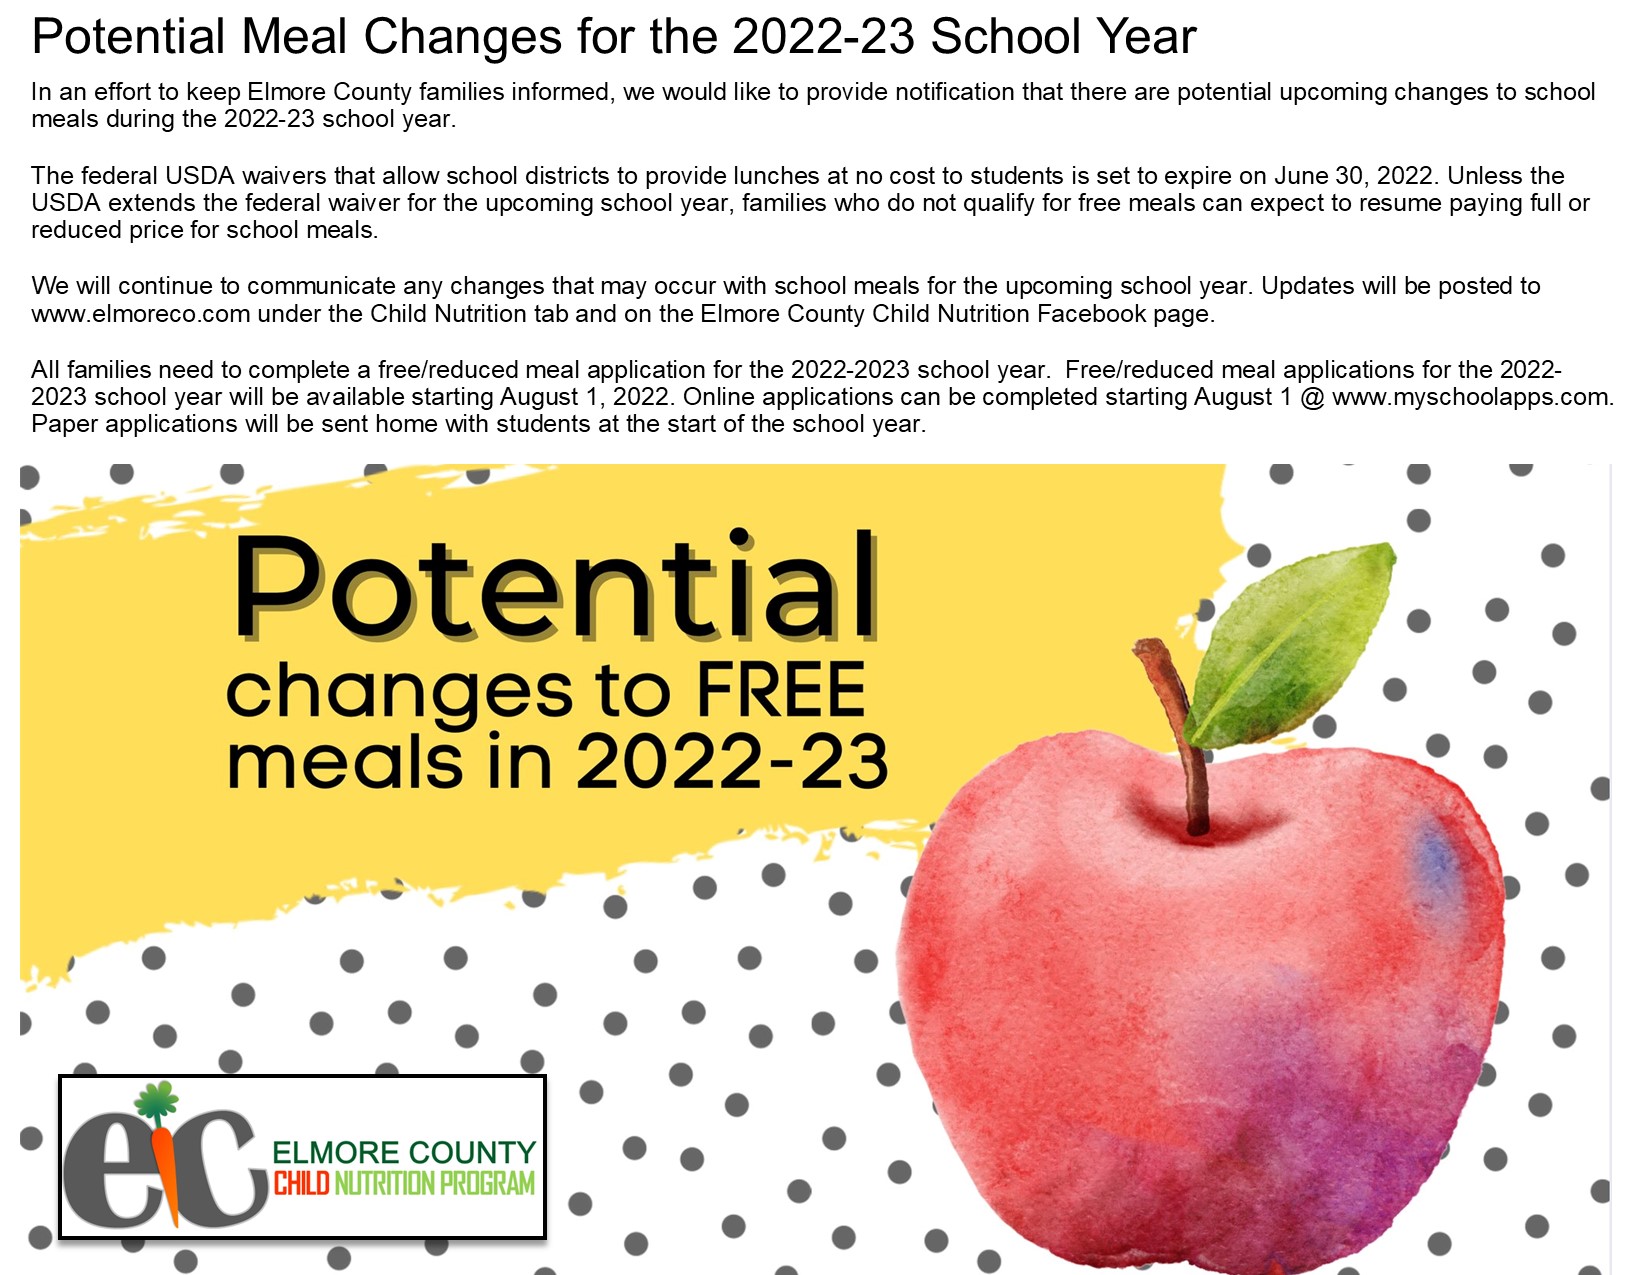 Meal prices change for 2022-2023